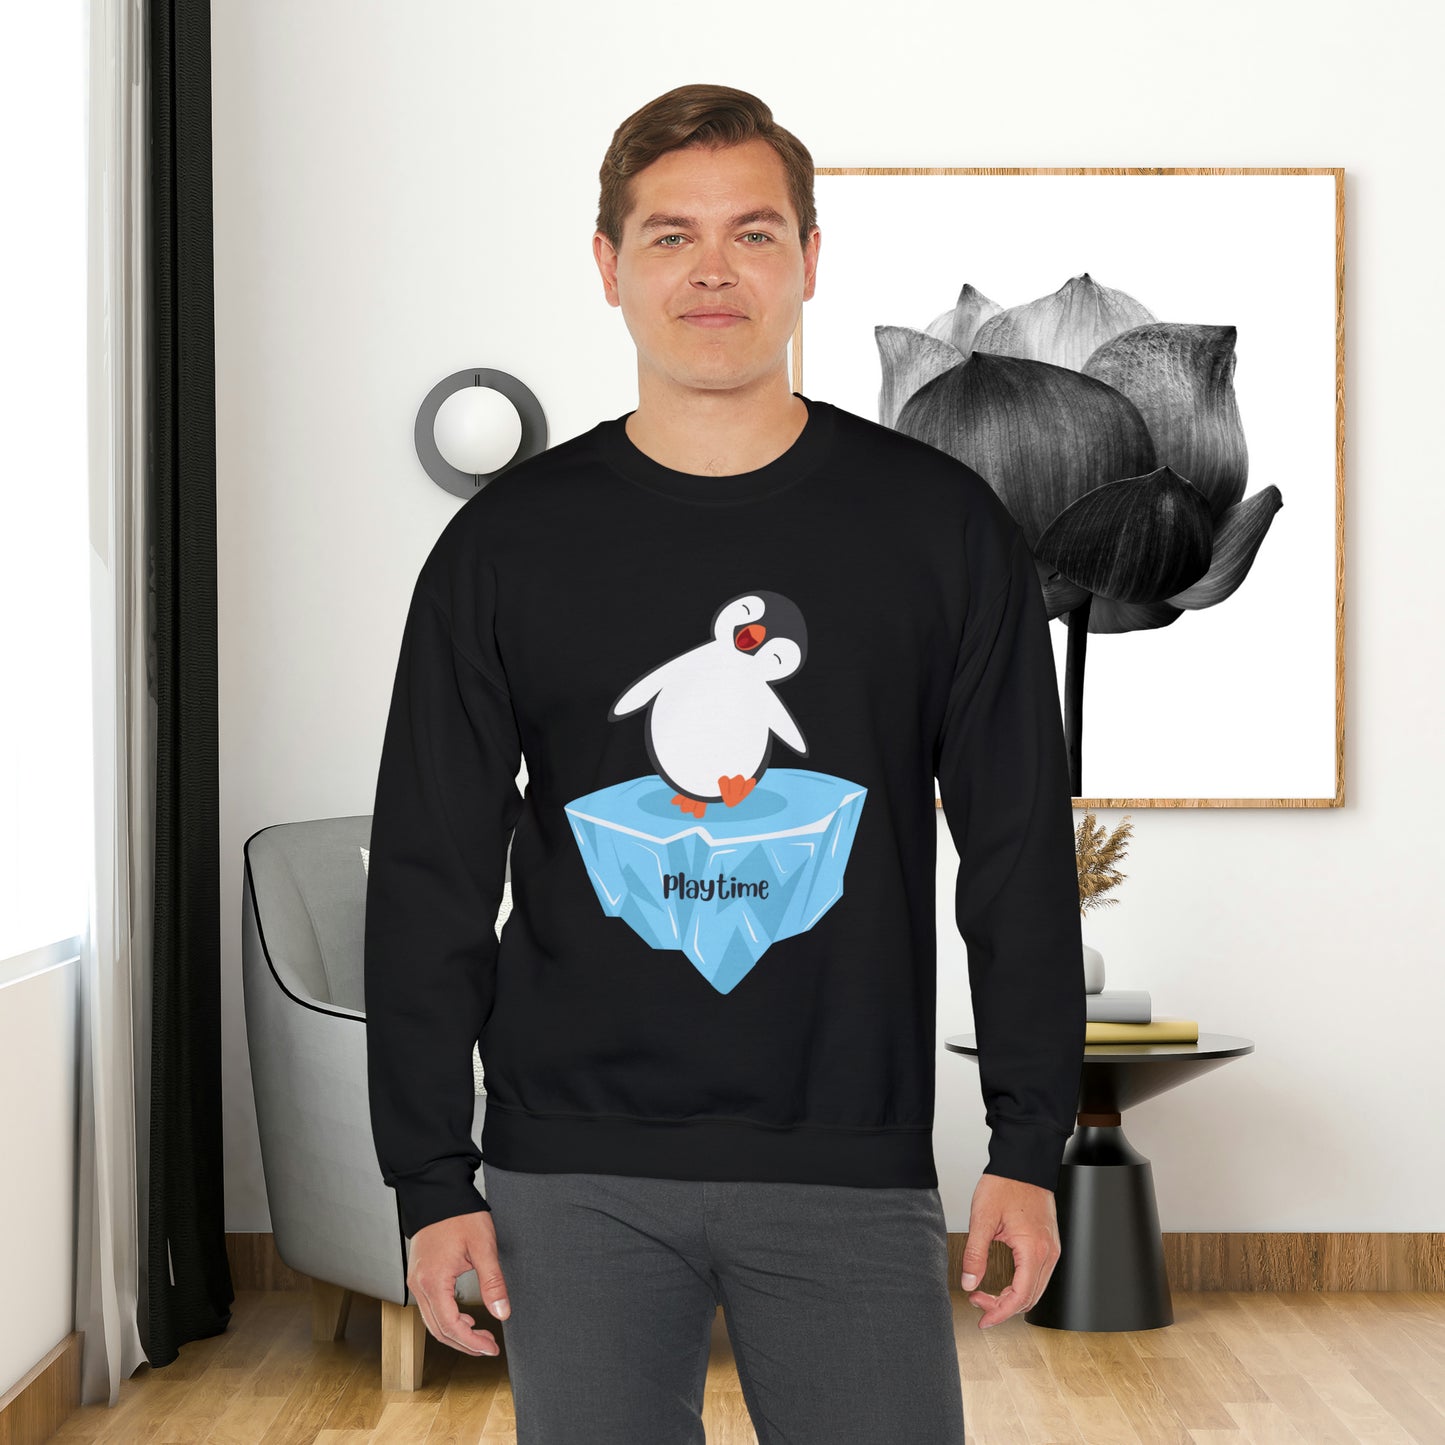 Playtime! Cute and happy penguin on an iceberg design. Give the gift of this Unisex Heavy Blend™ Crewneck Sweatshirt or get one for yourself.